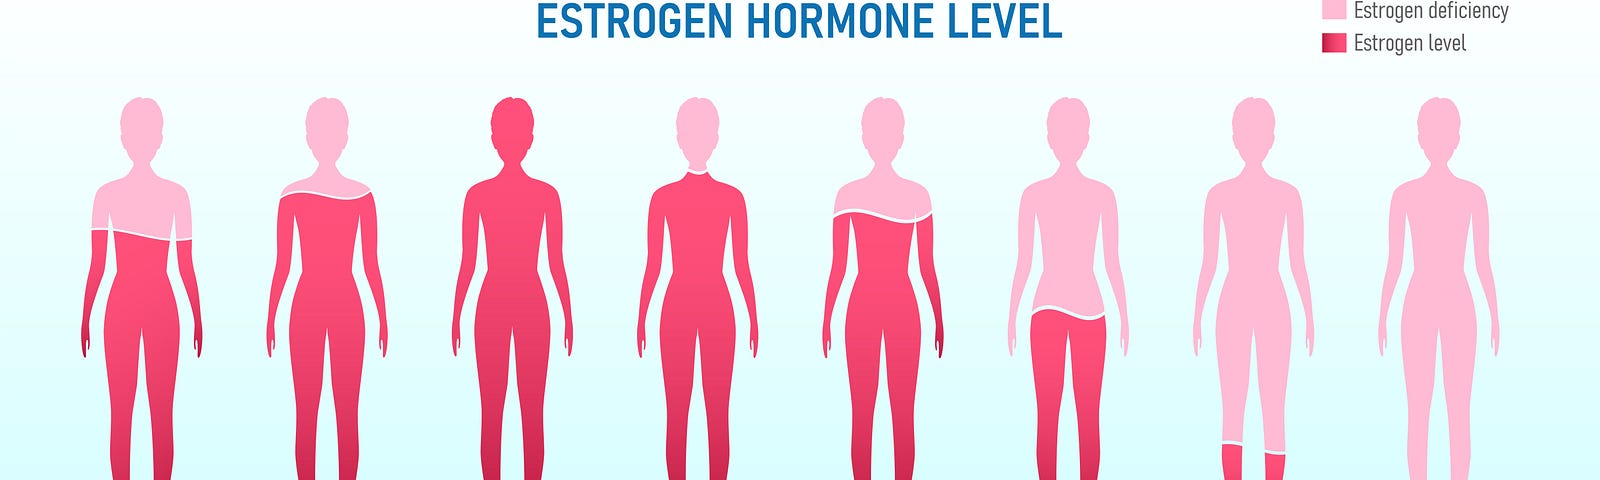 Illustration showing drops in hormones in women by age.